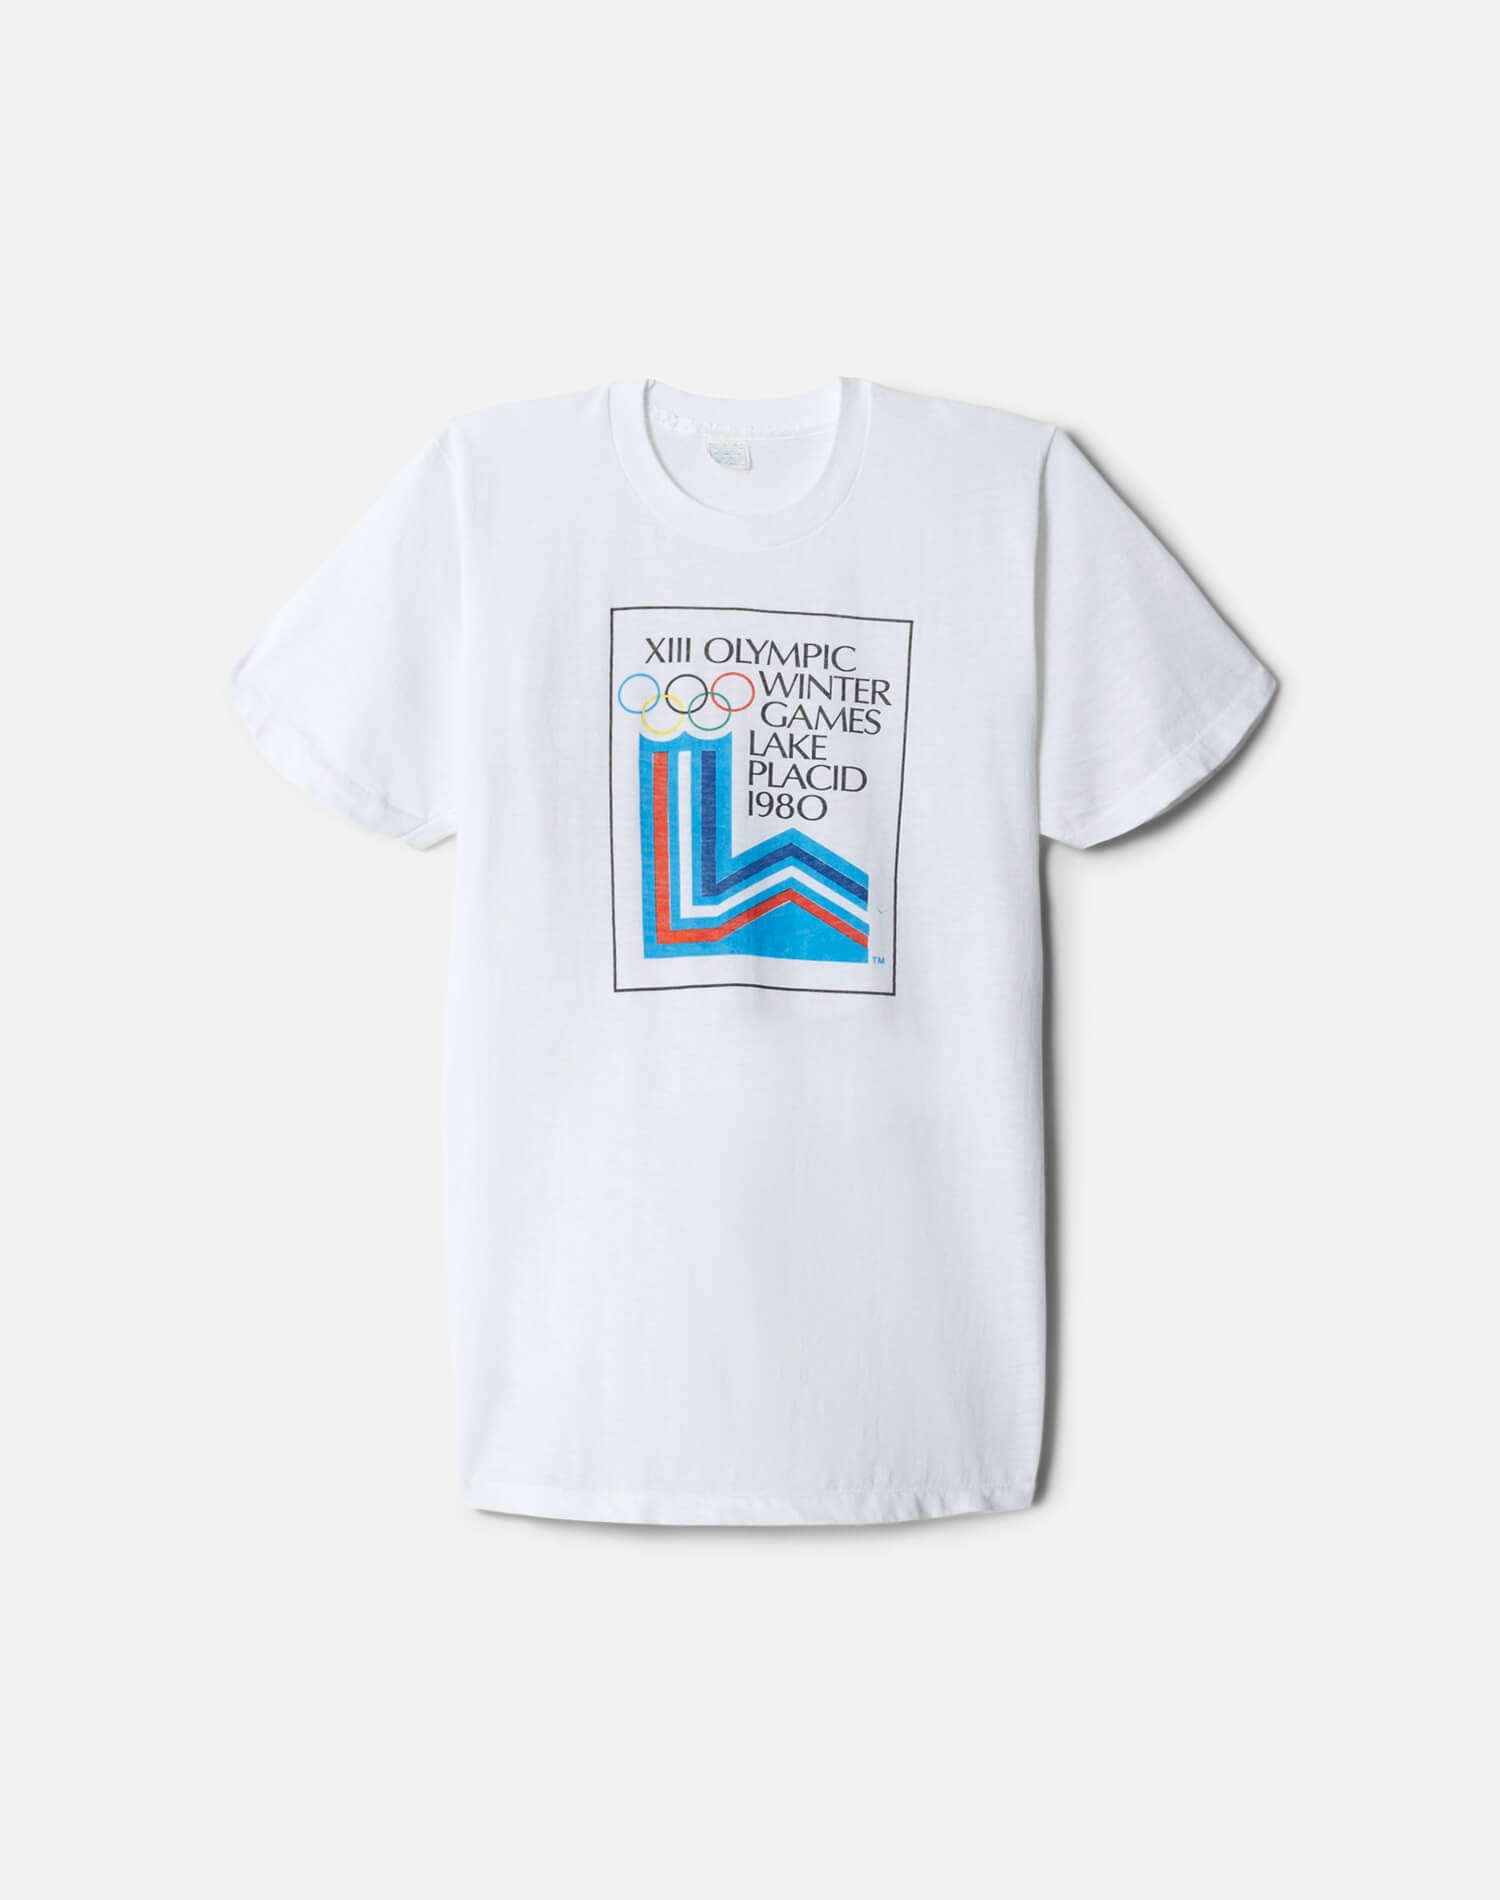 1980 Olympic Winter Games Tee